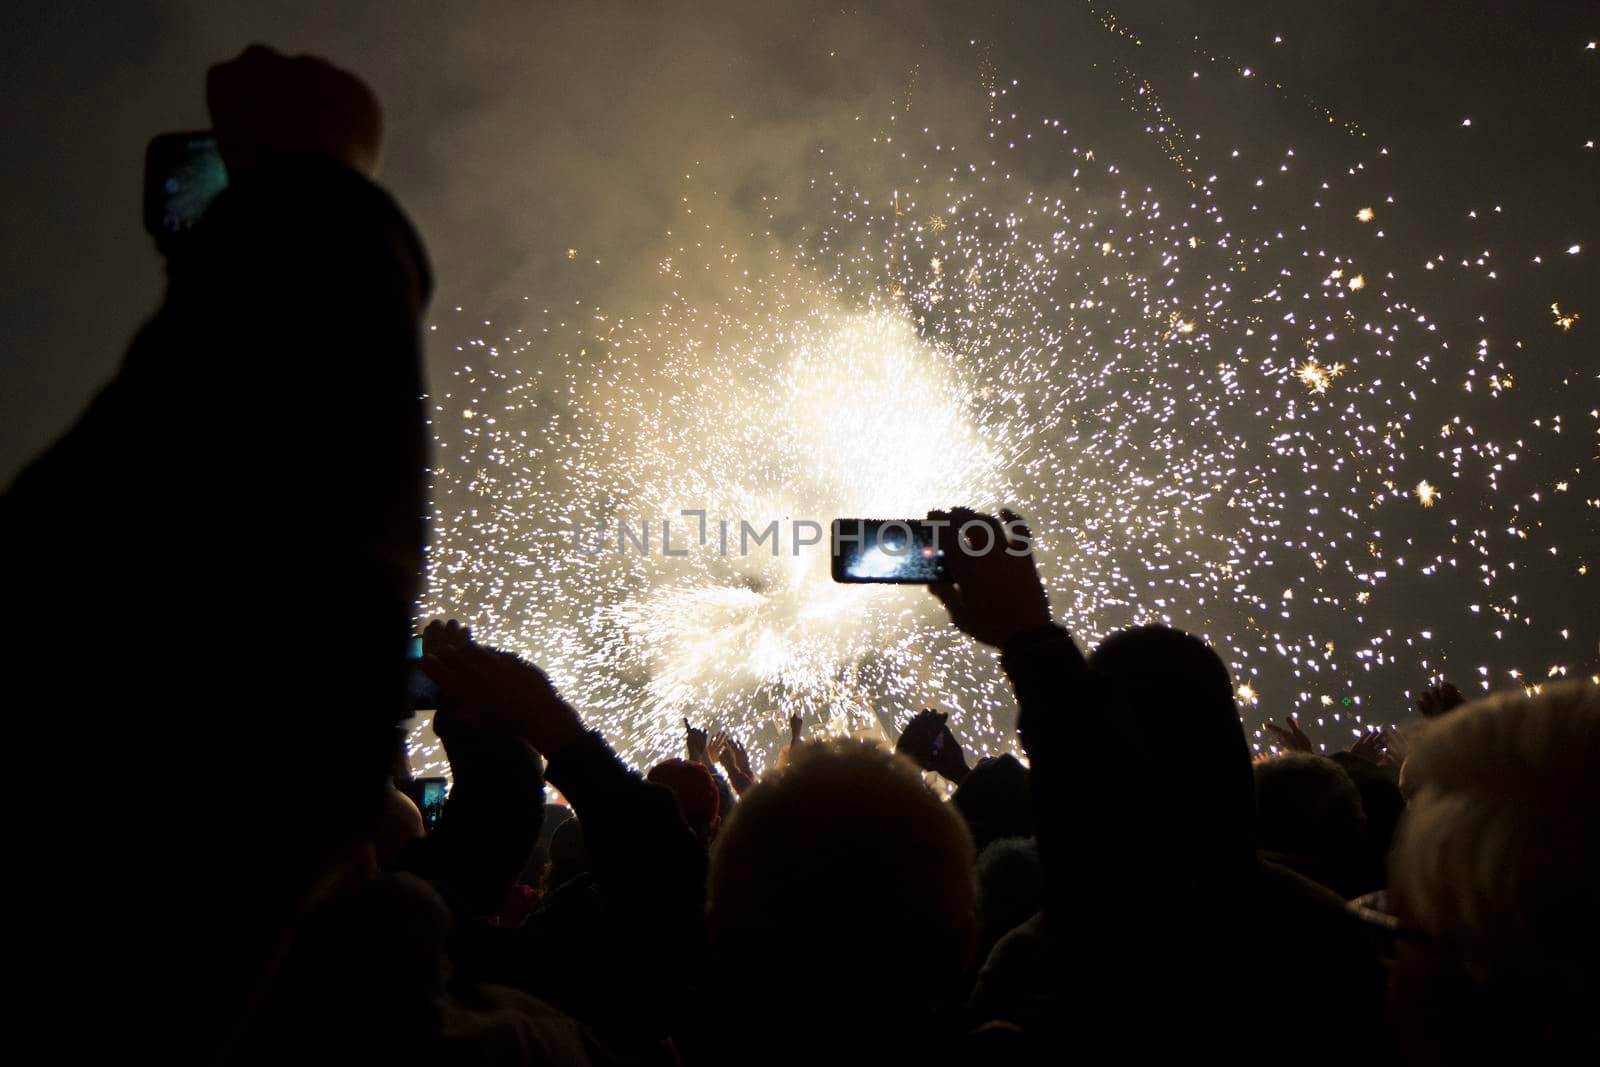 A person films the Cavallo di fuoco in Italy with their phone by ChrisWestPhoto